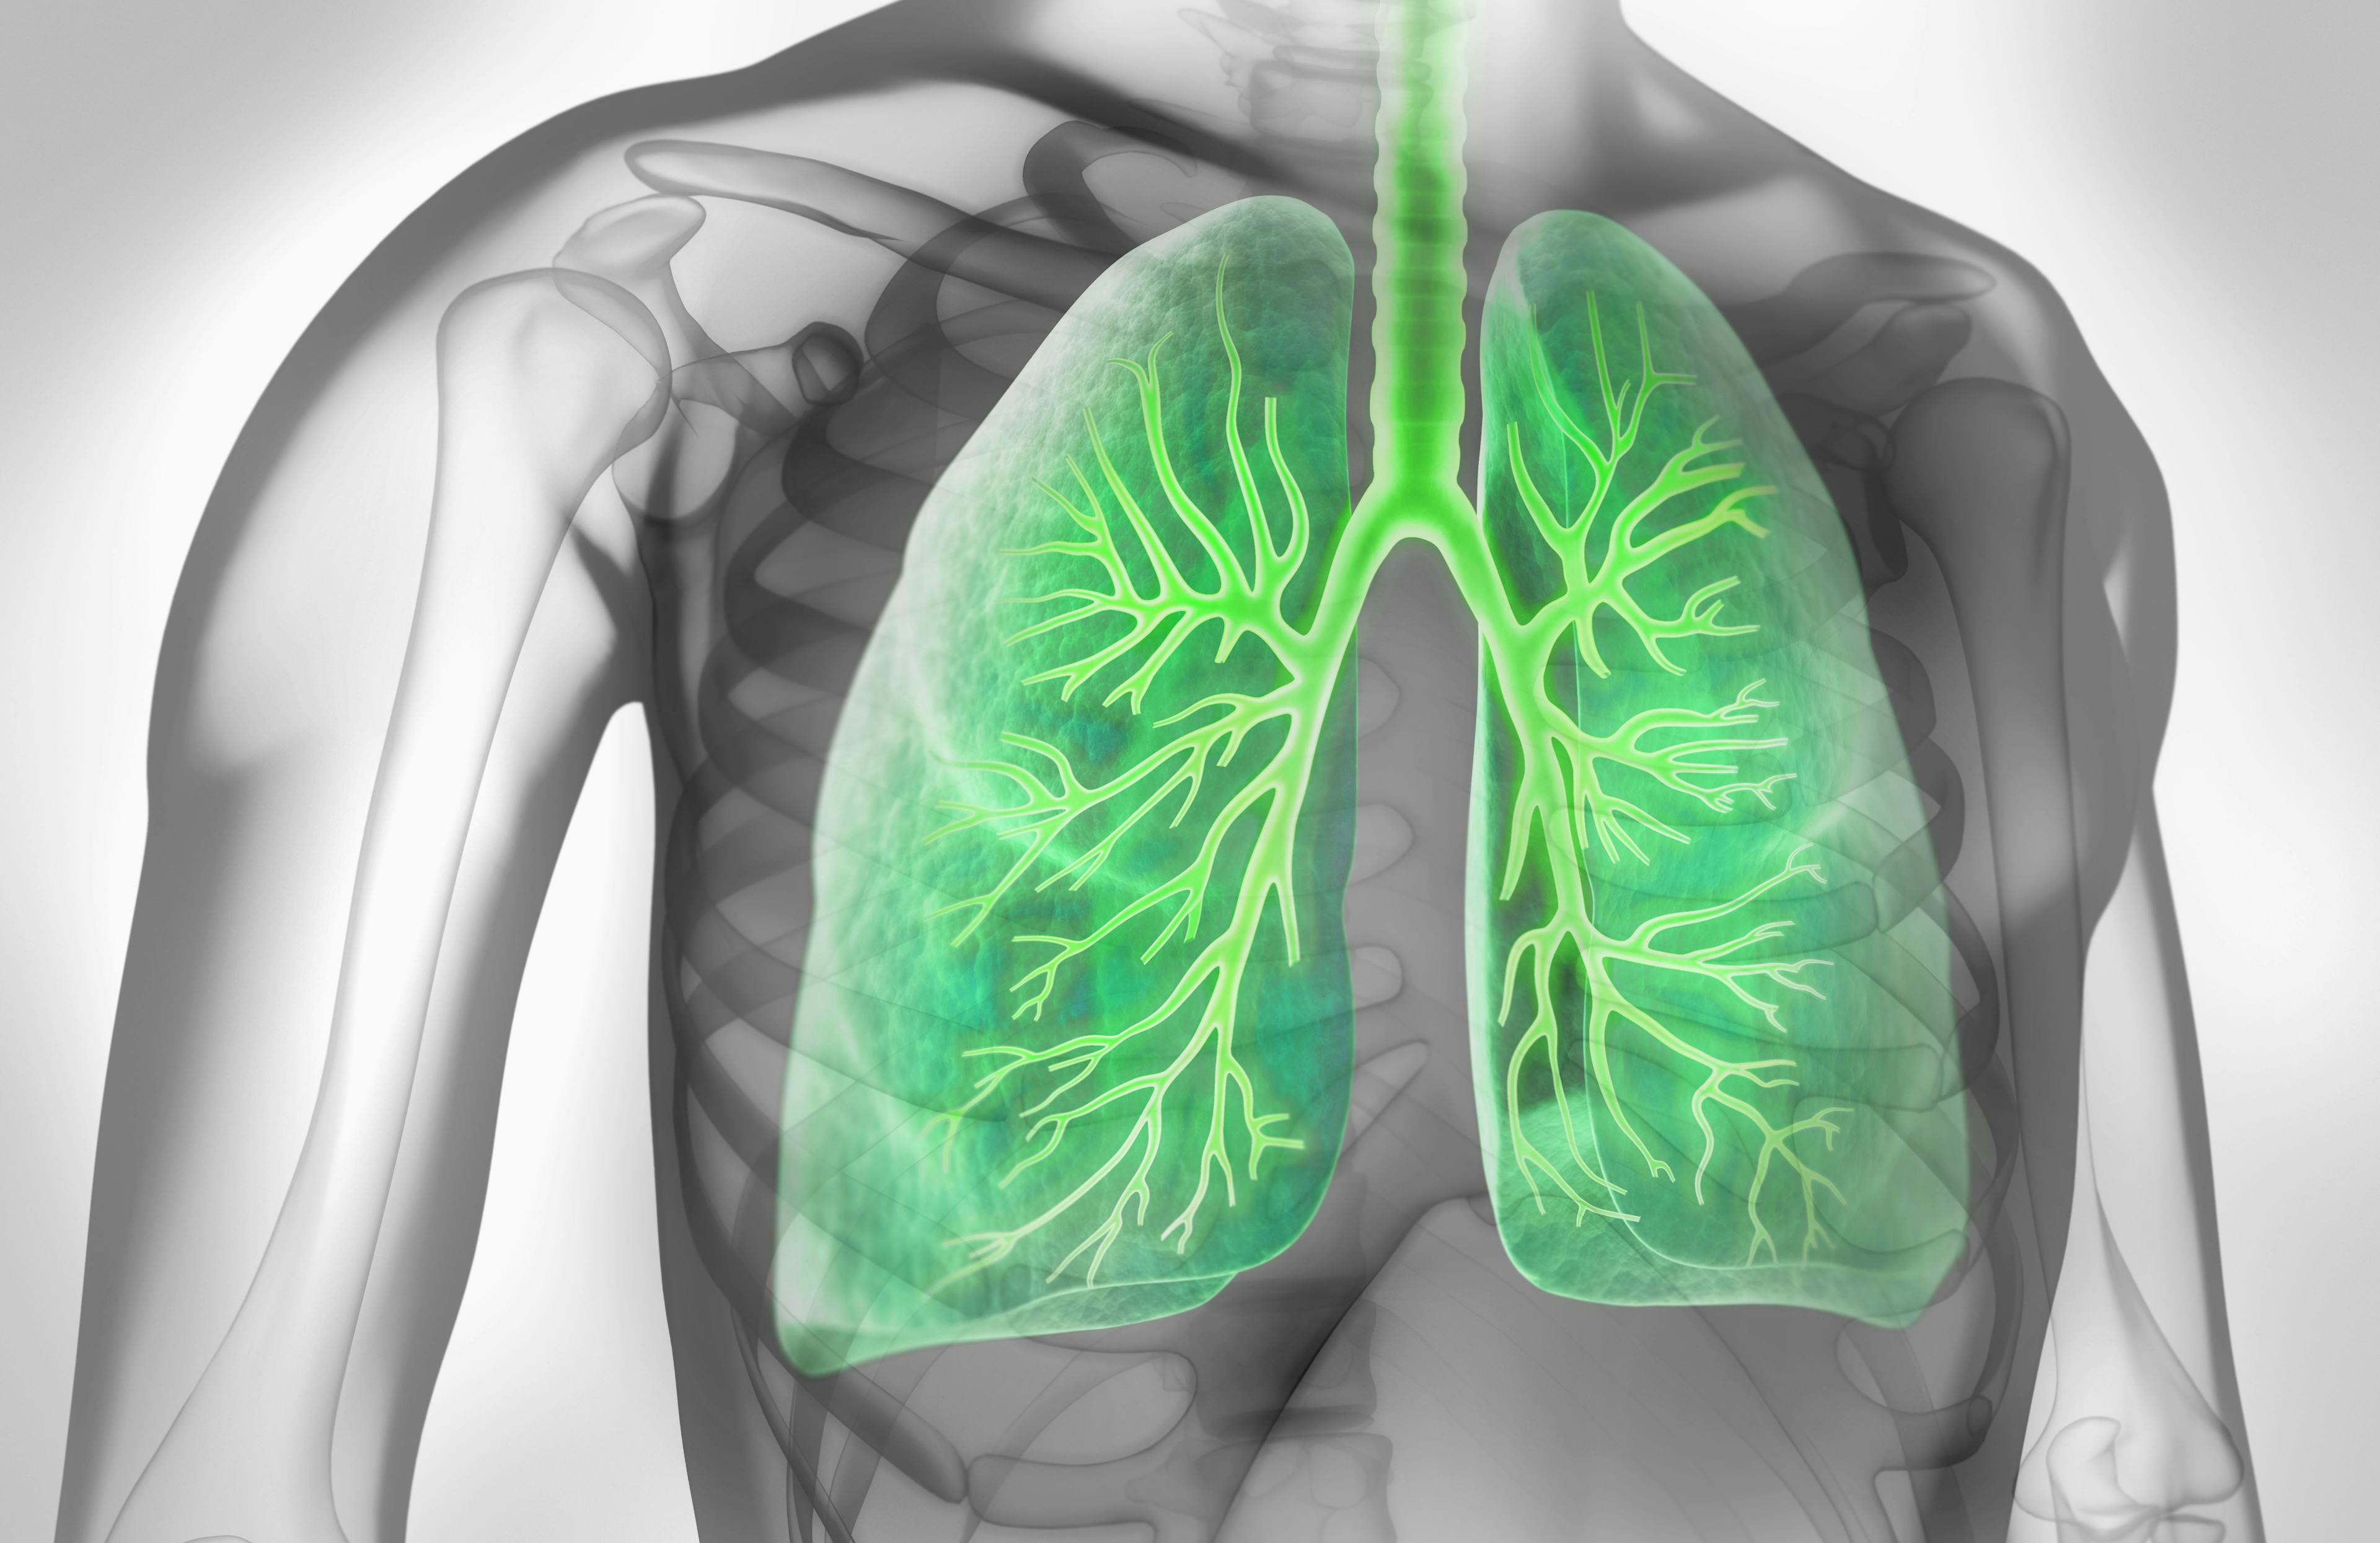 x-ray of person with lungs highlighted in bright green